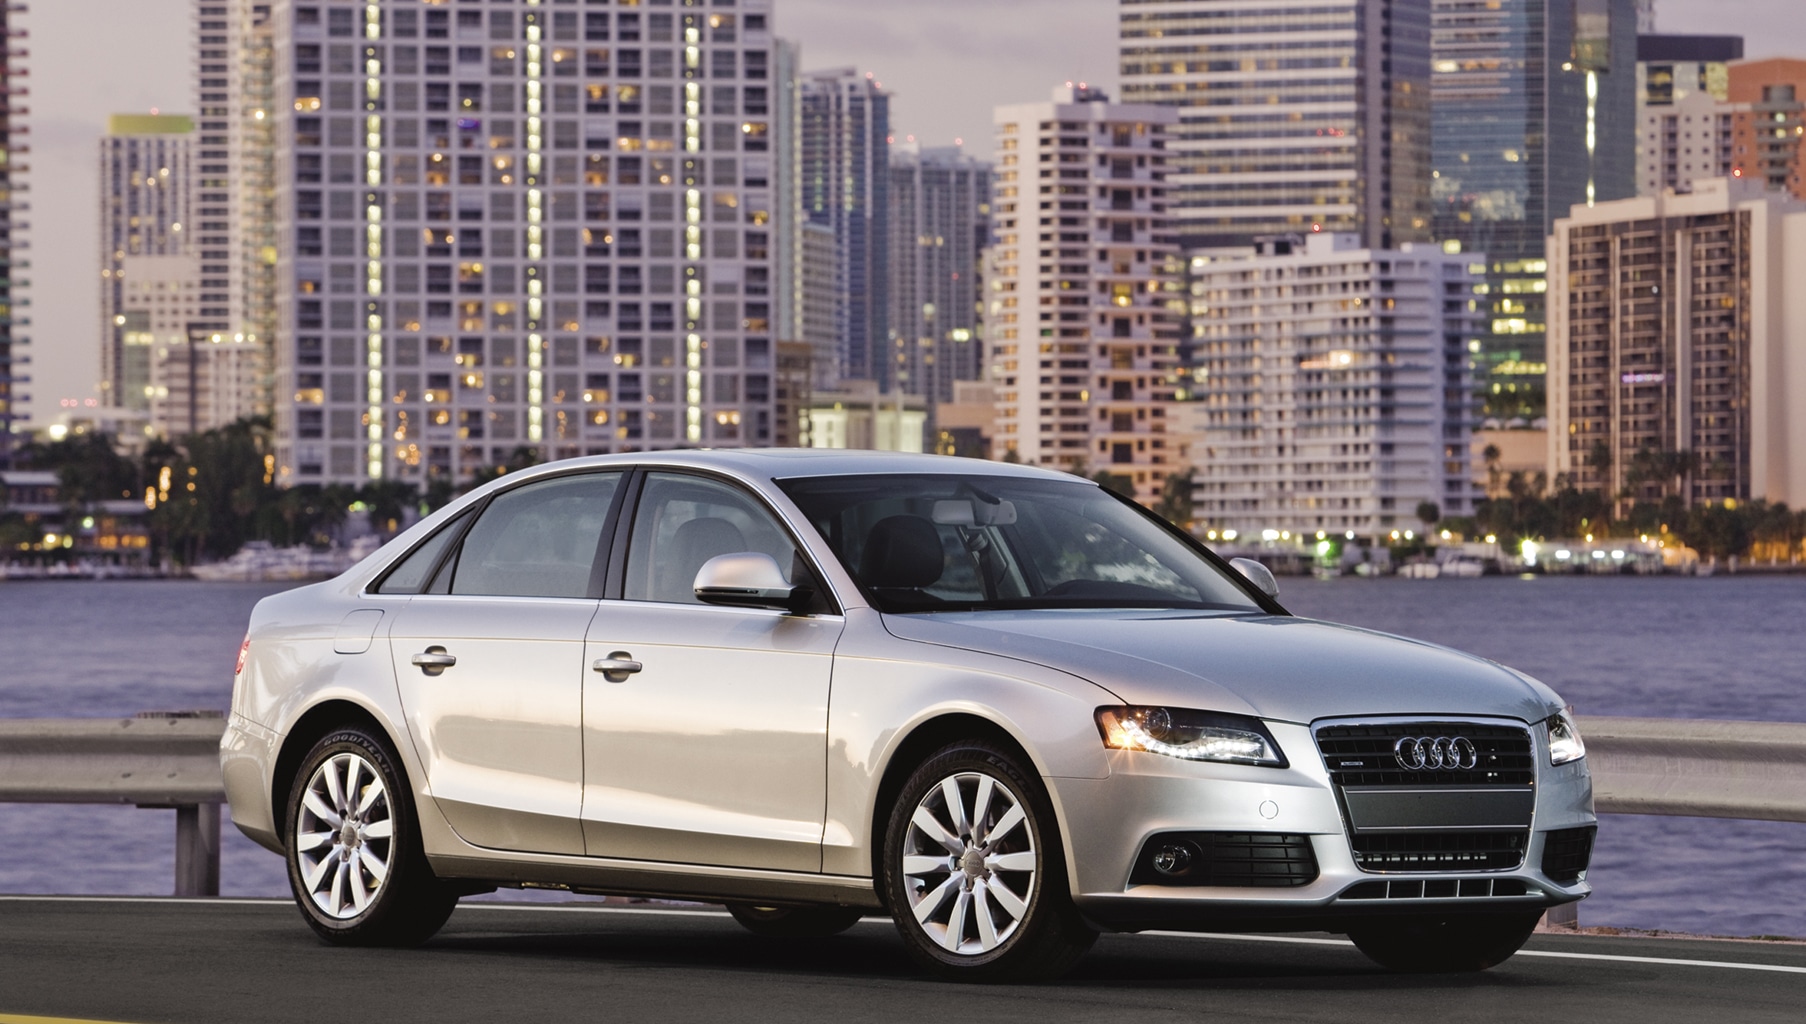 Audi A4 Quattro: A Sporting Sedan with All-weather Capability ...